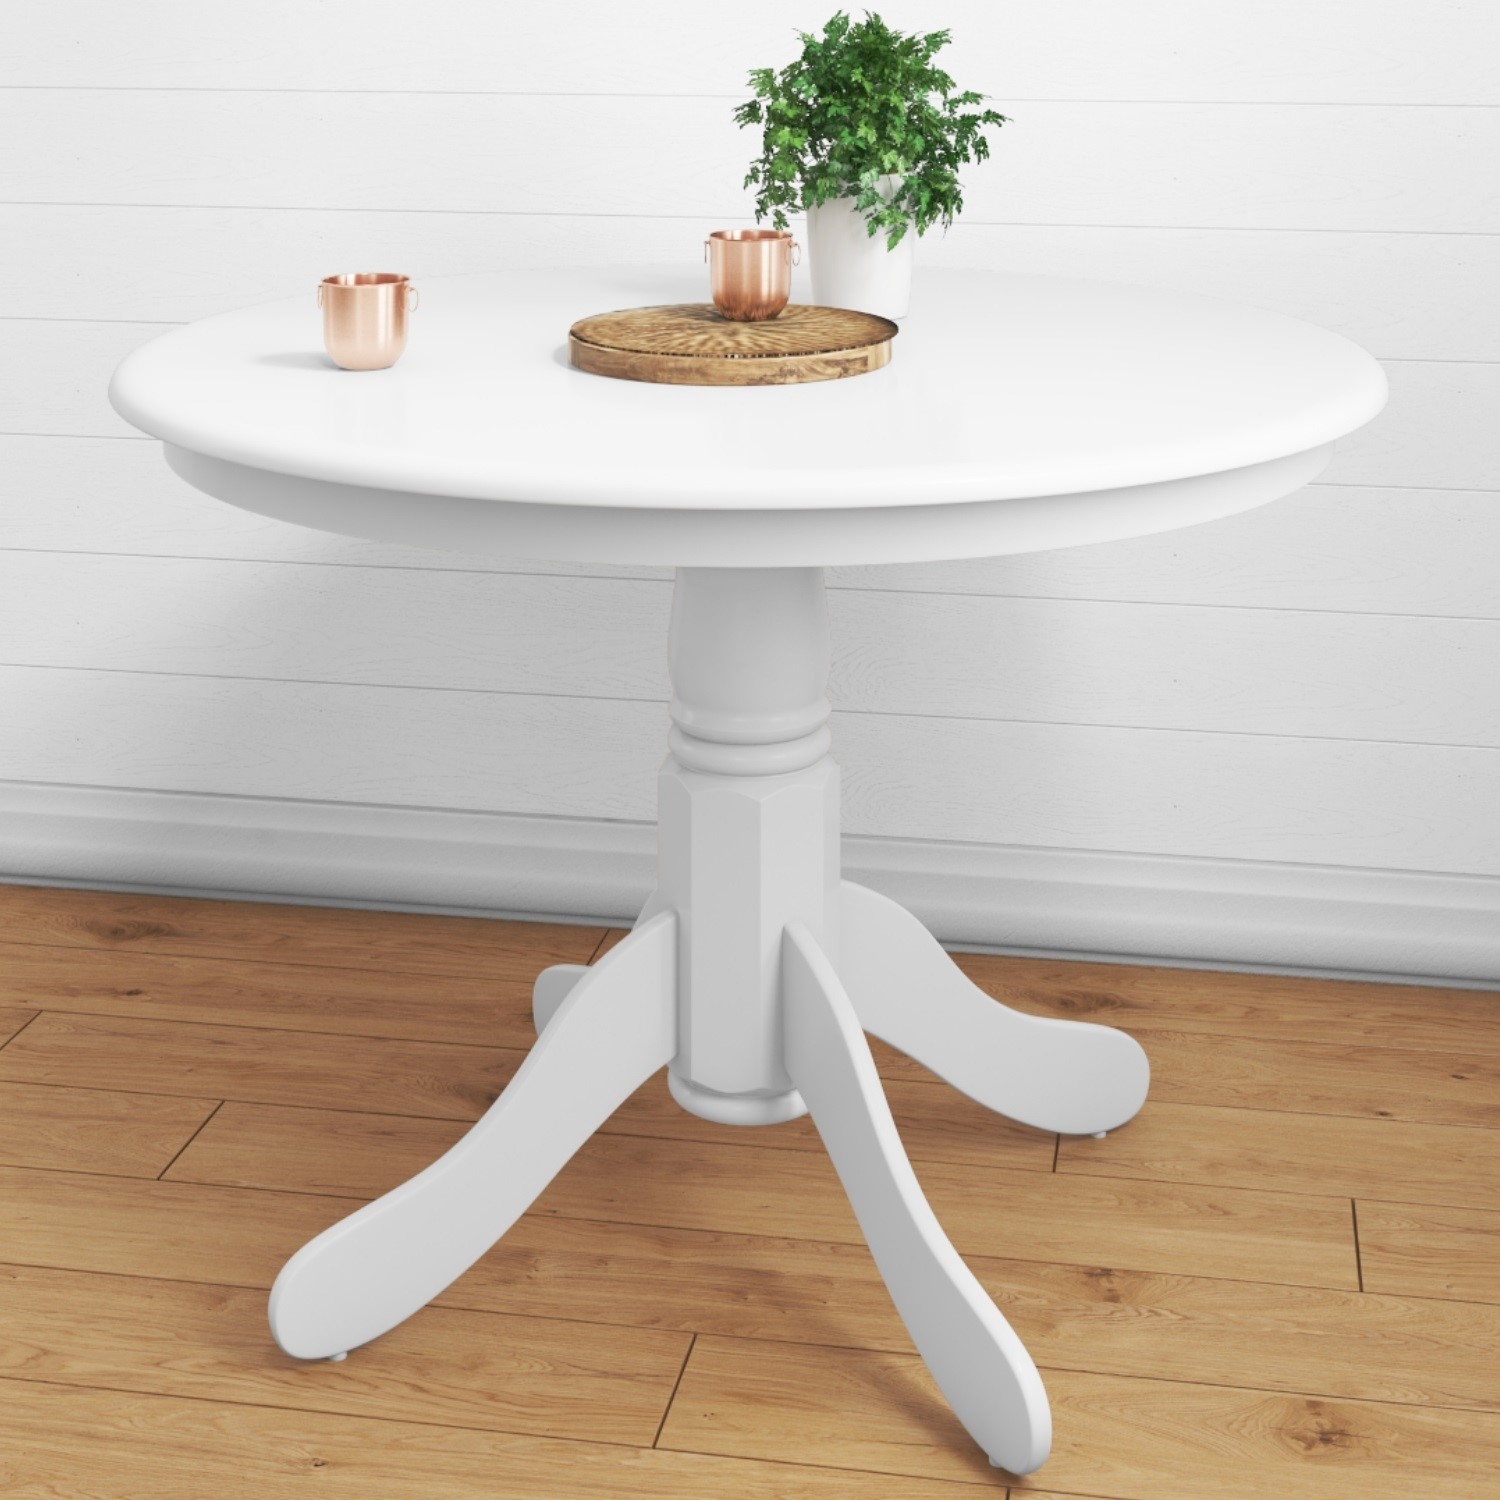 Small Round Dining Table In White Seats 4 Rhode Island 17997